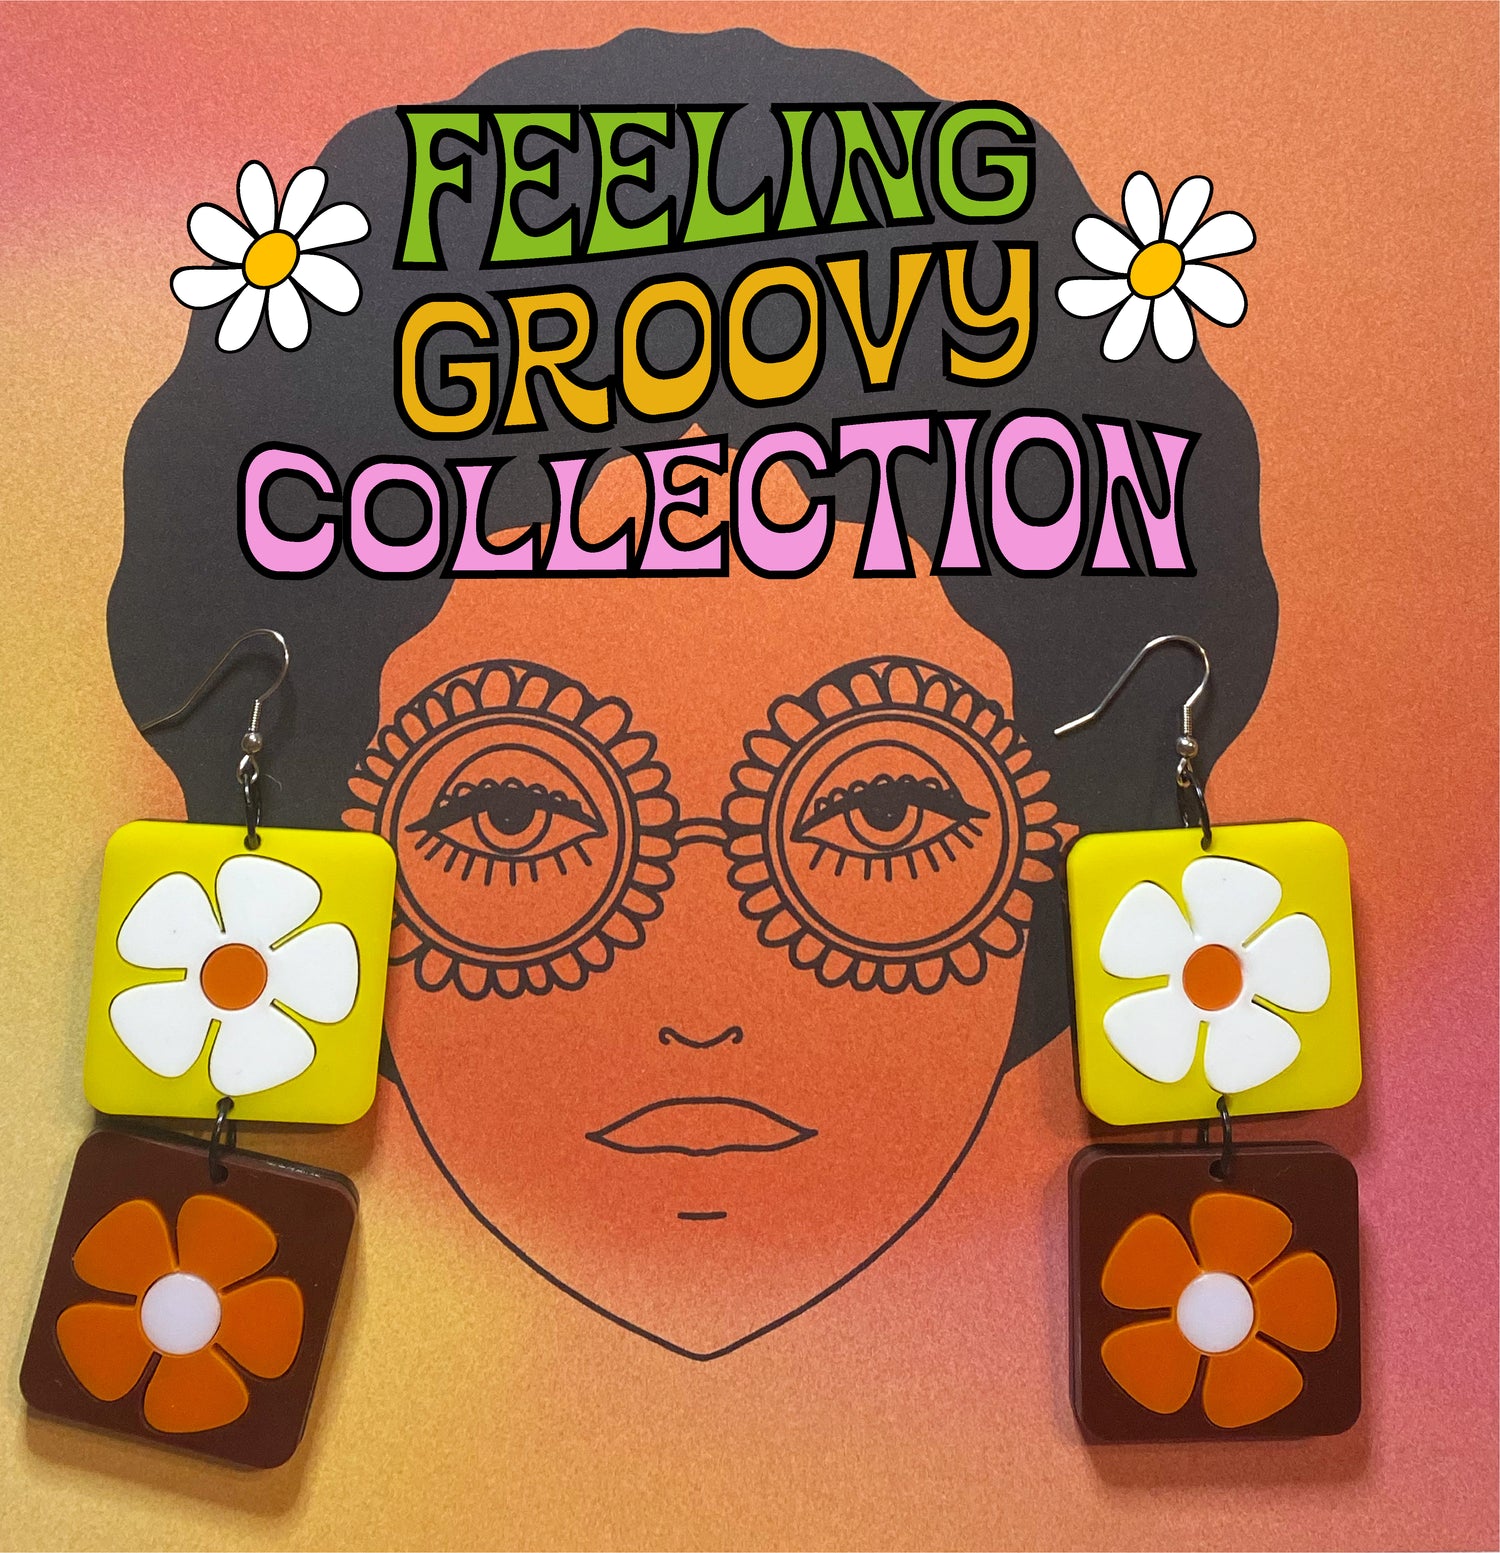 ✿Feeling Groovy Collection ✿